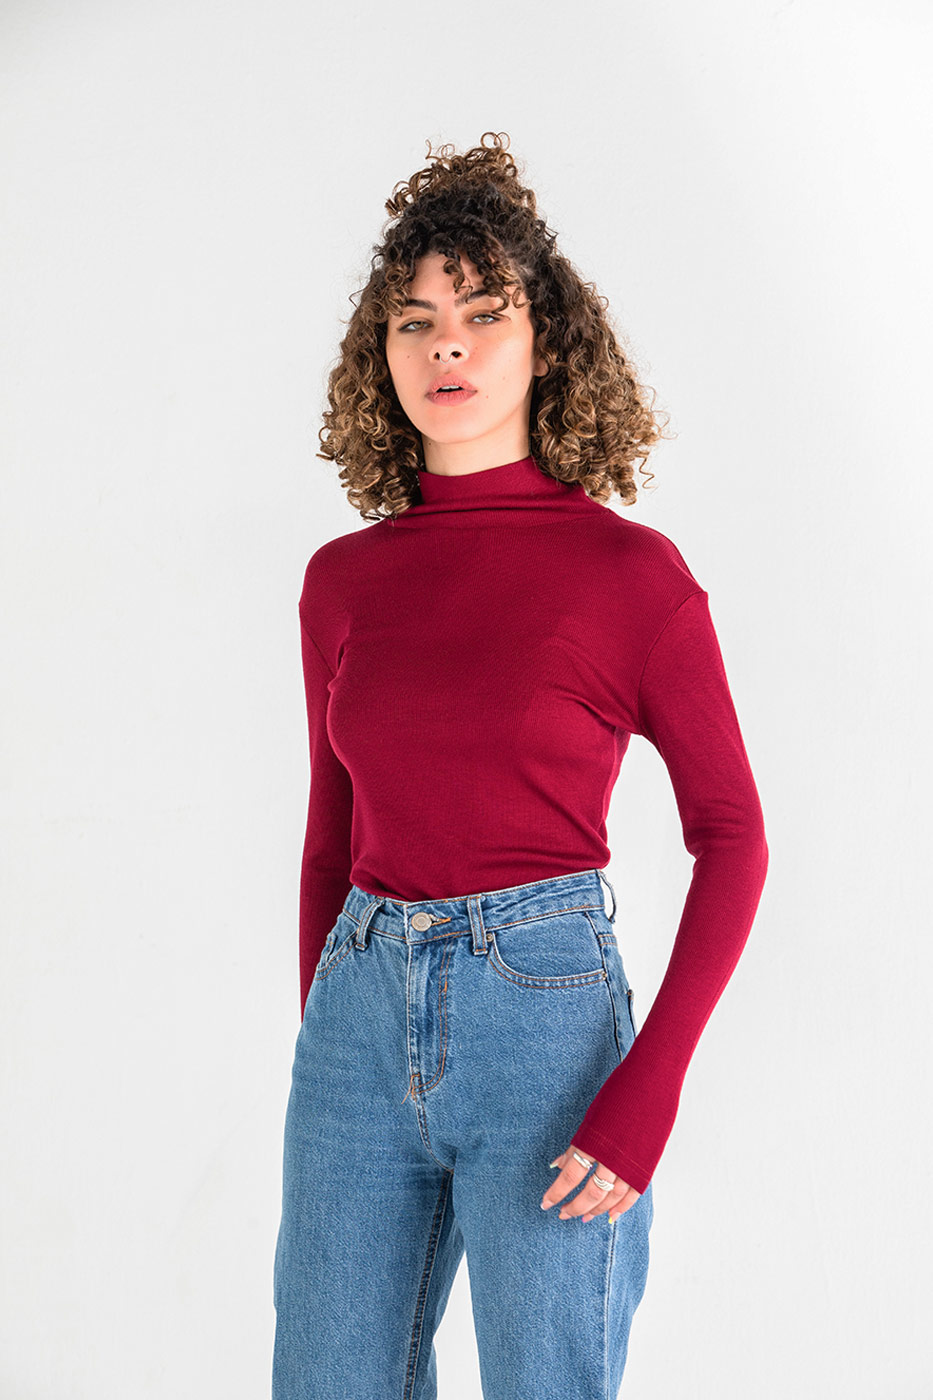 Buy The Turtle Neck Top In Burgundy online from Dresscode - Egypt